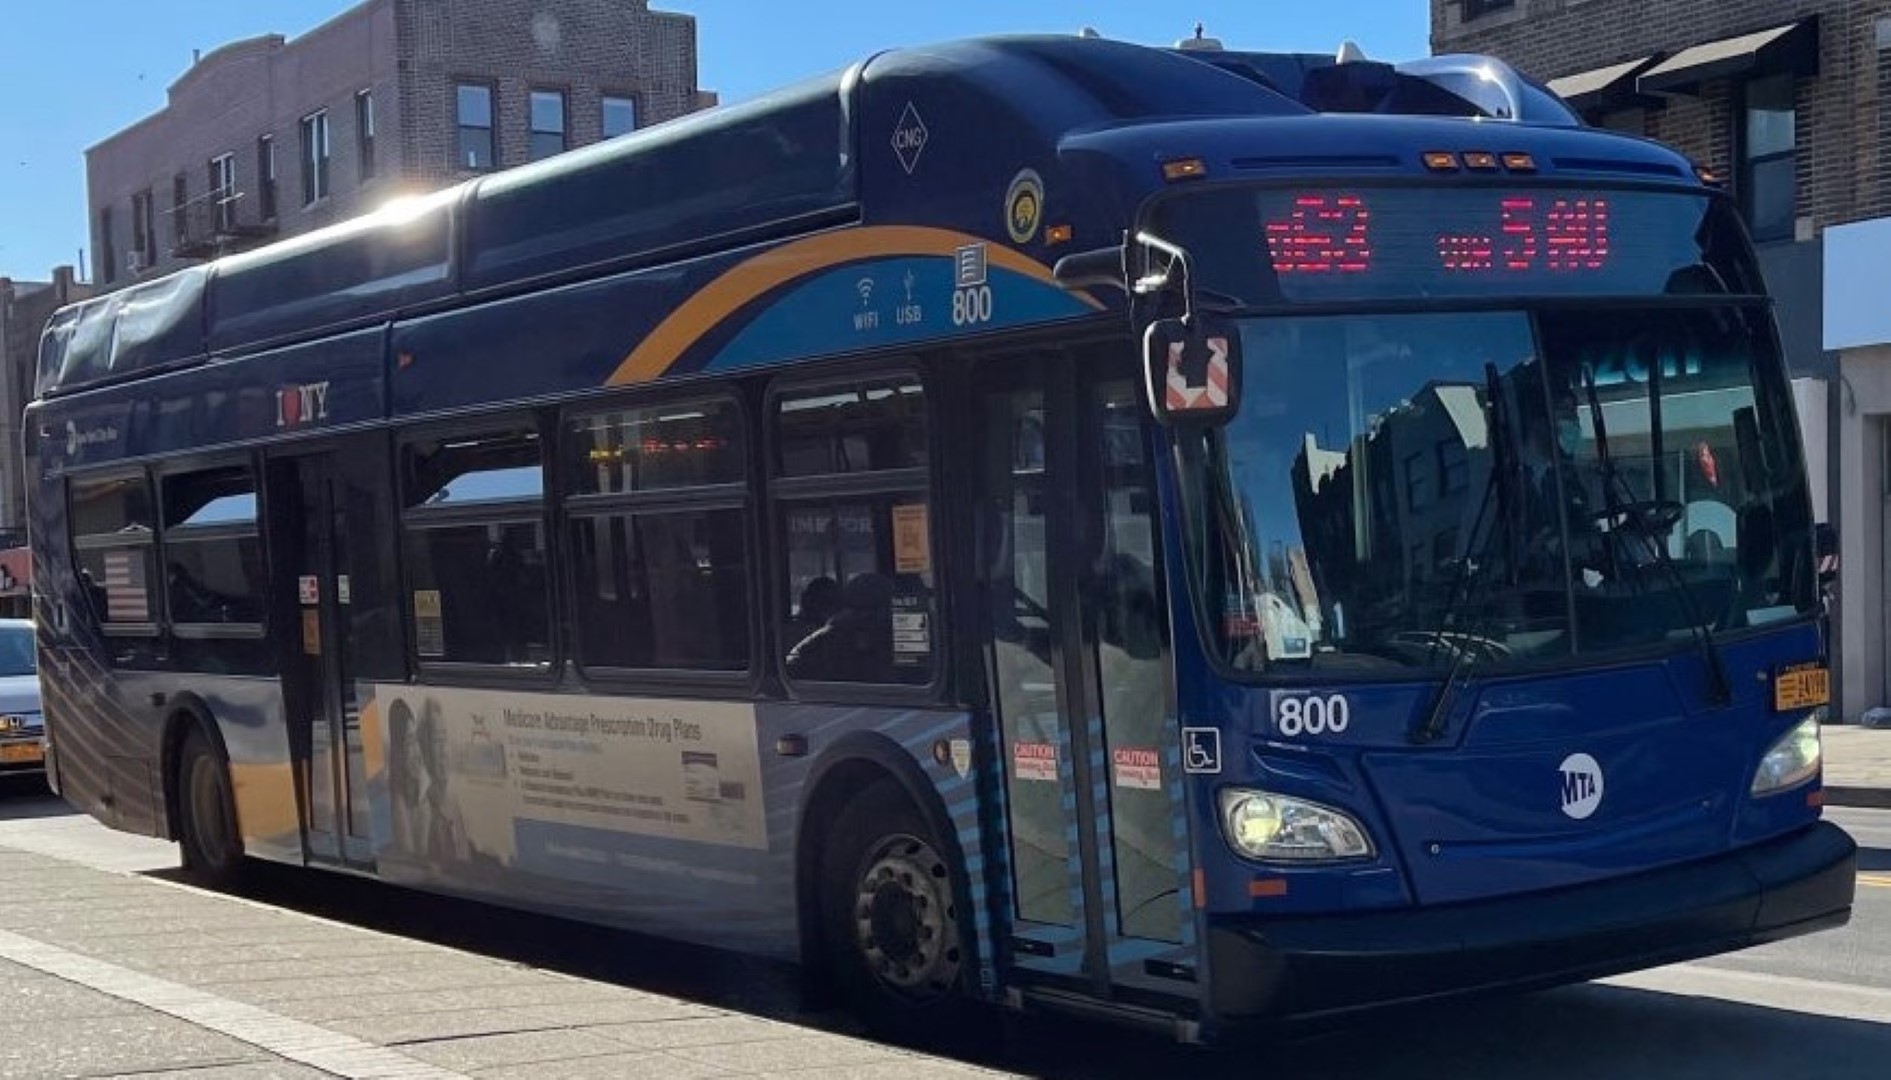 A blue mta bus is parked, displaying route "s79 sbs" on a sunny day. it features sleek modern design with a distinctive curvy roof and large front windows.